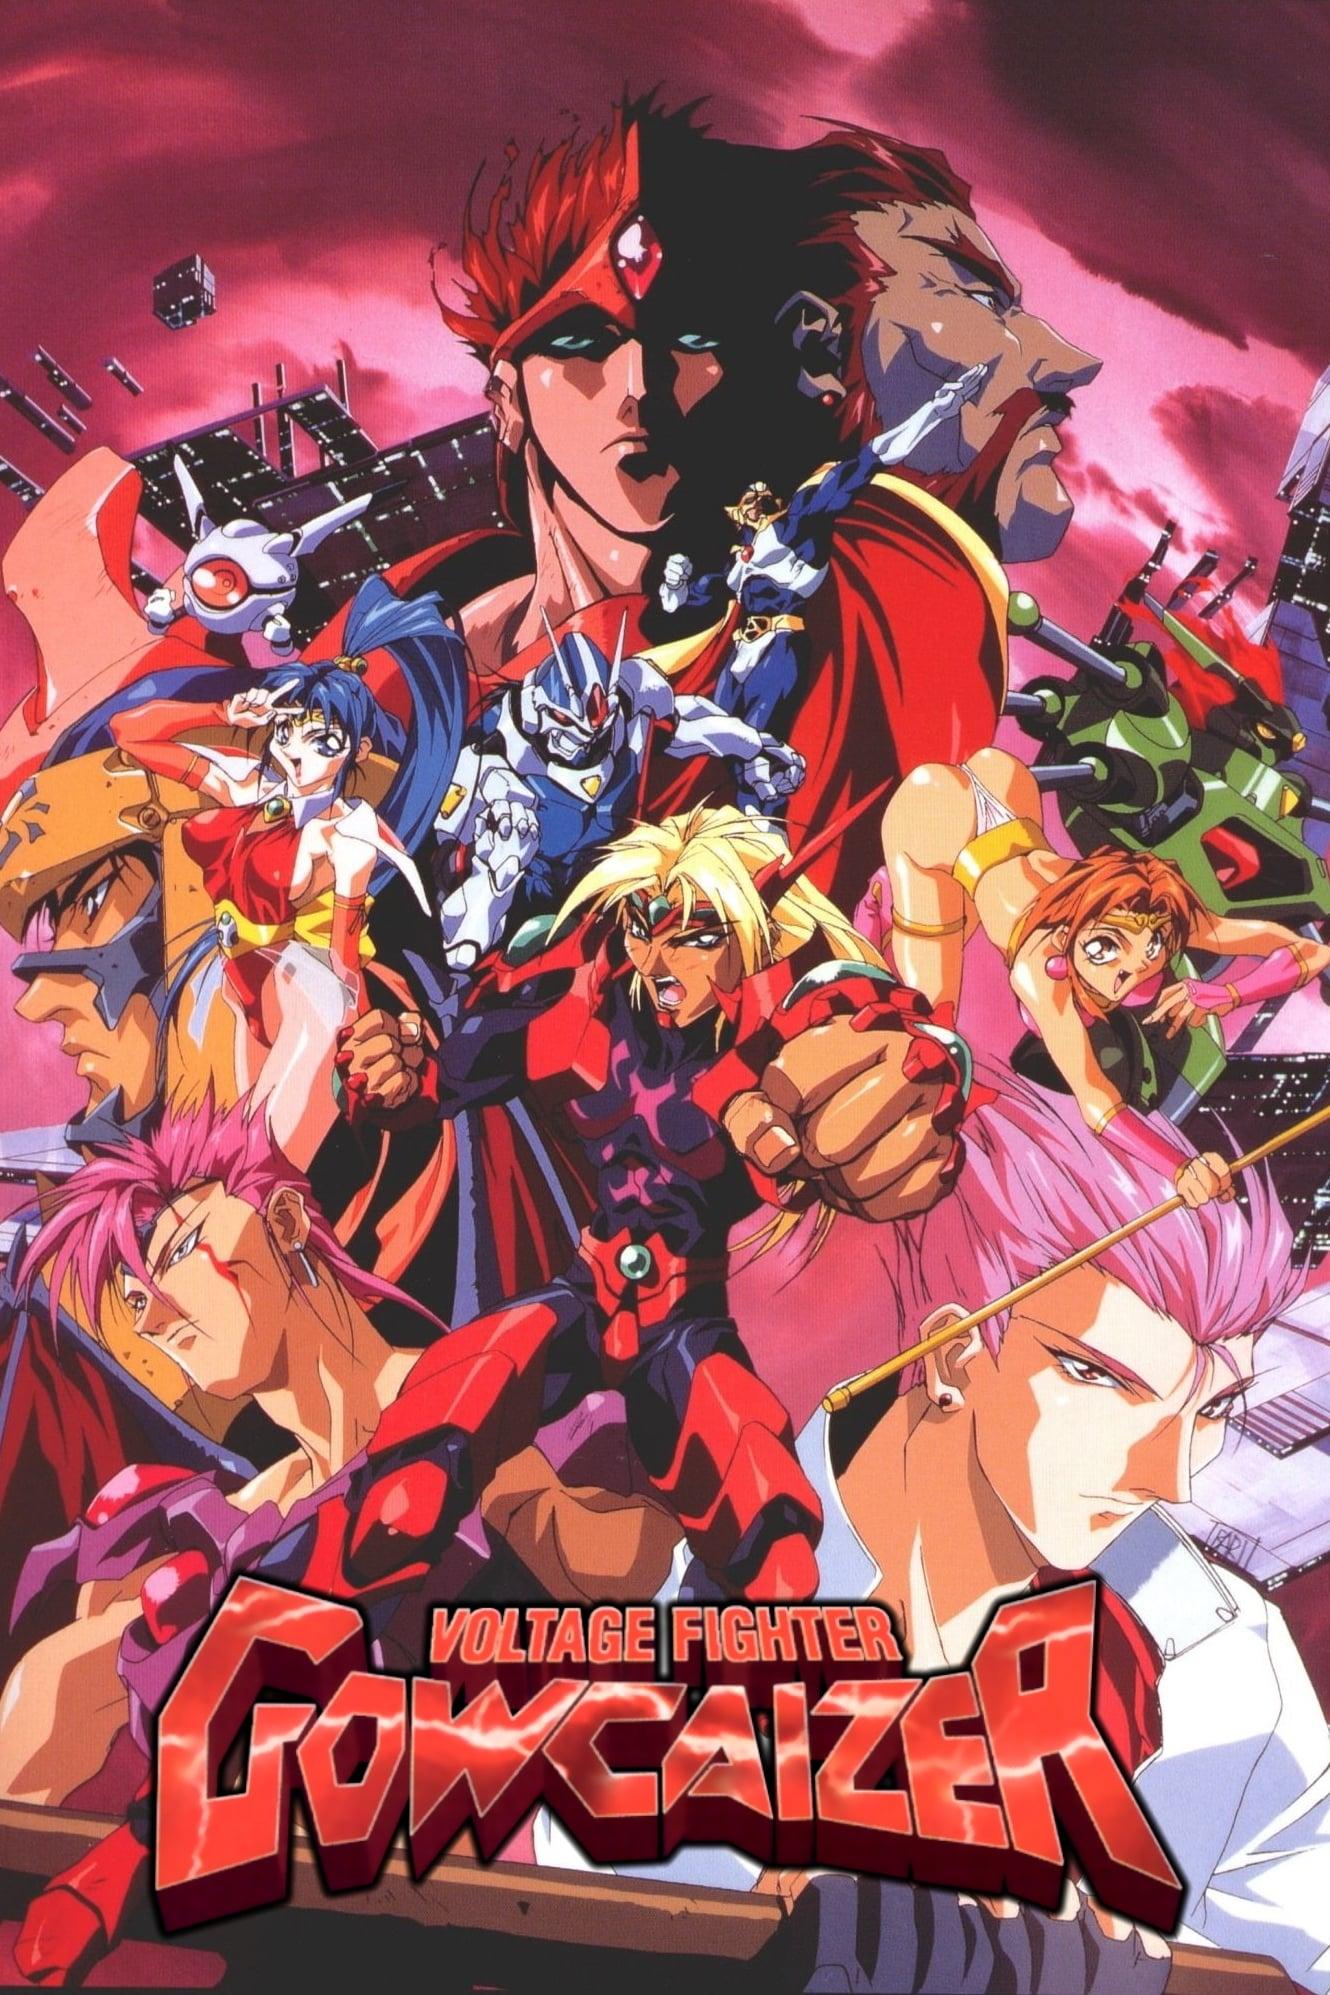 Voltage Fighter Gowcaizer poster